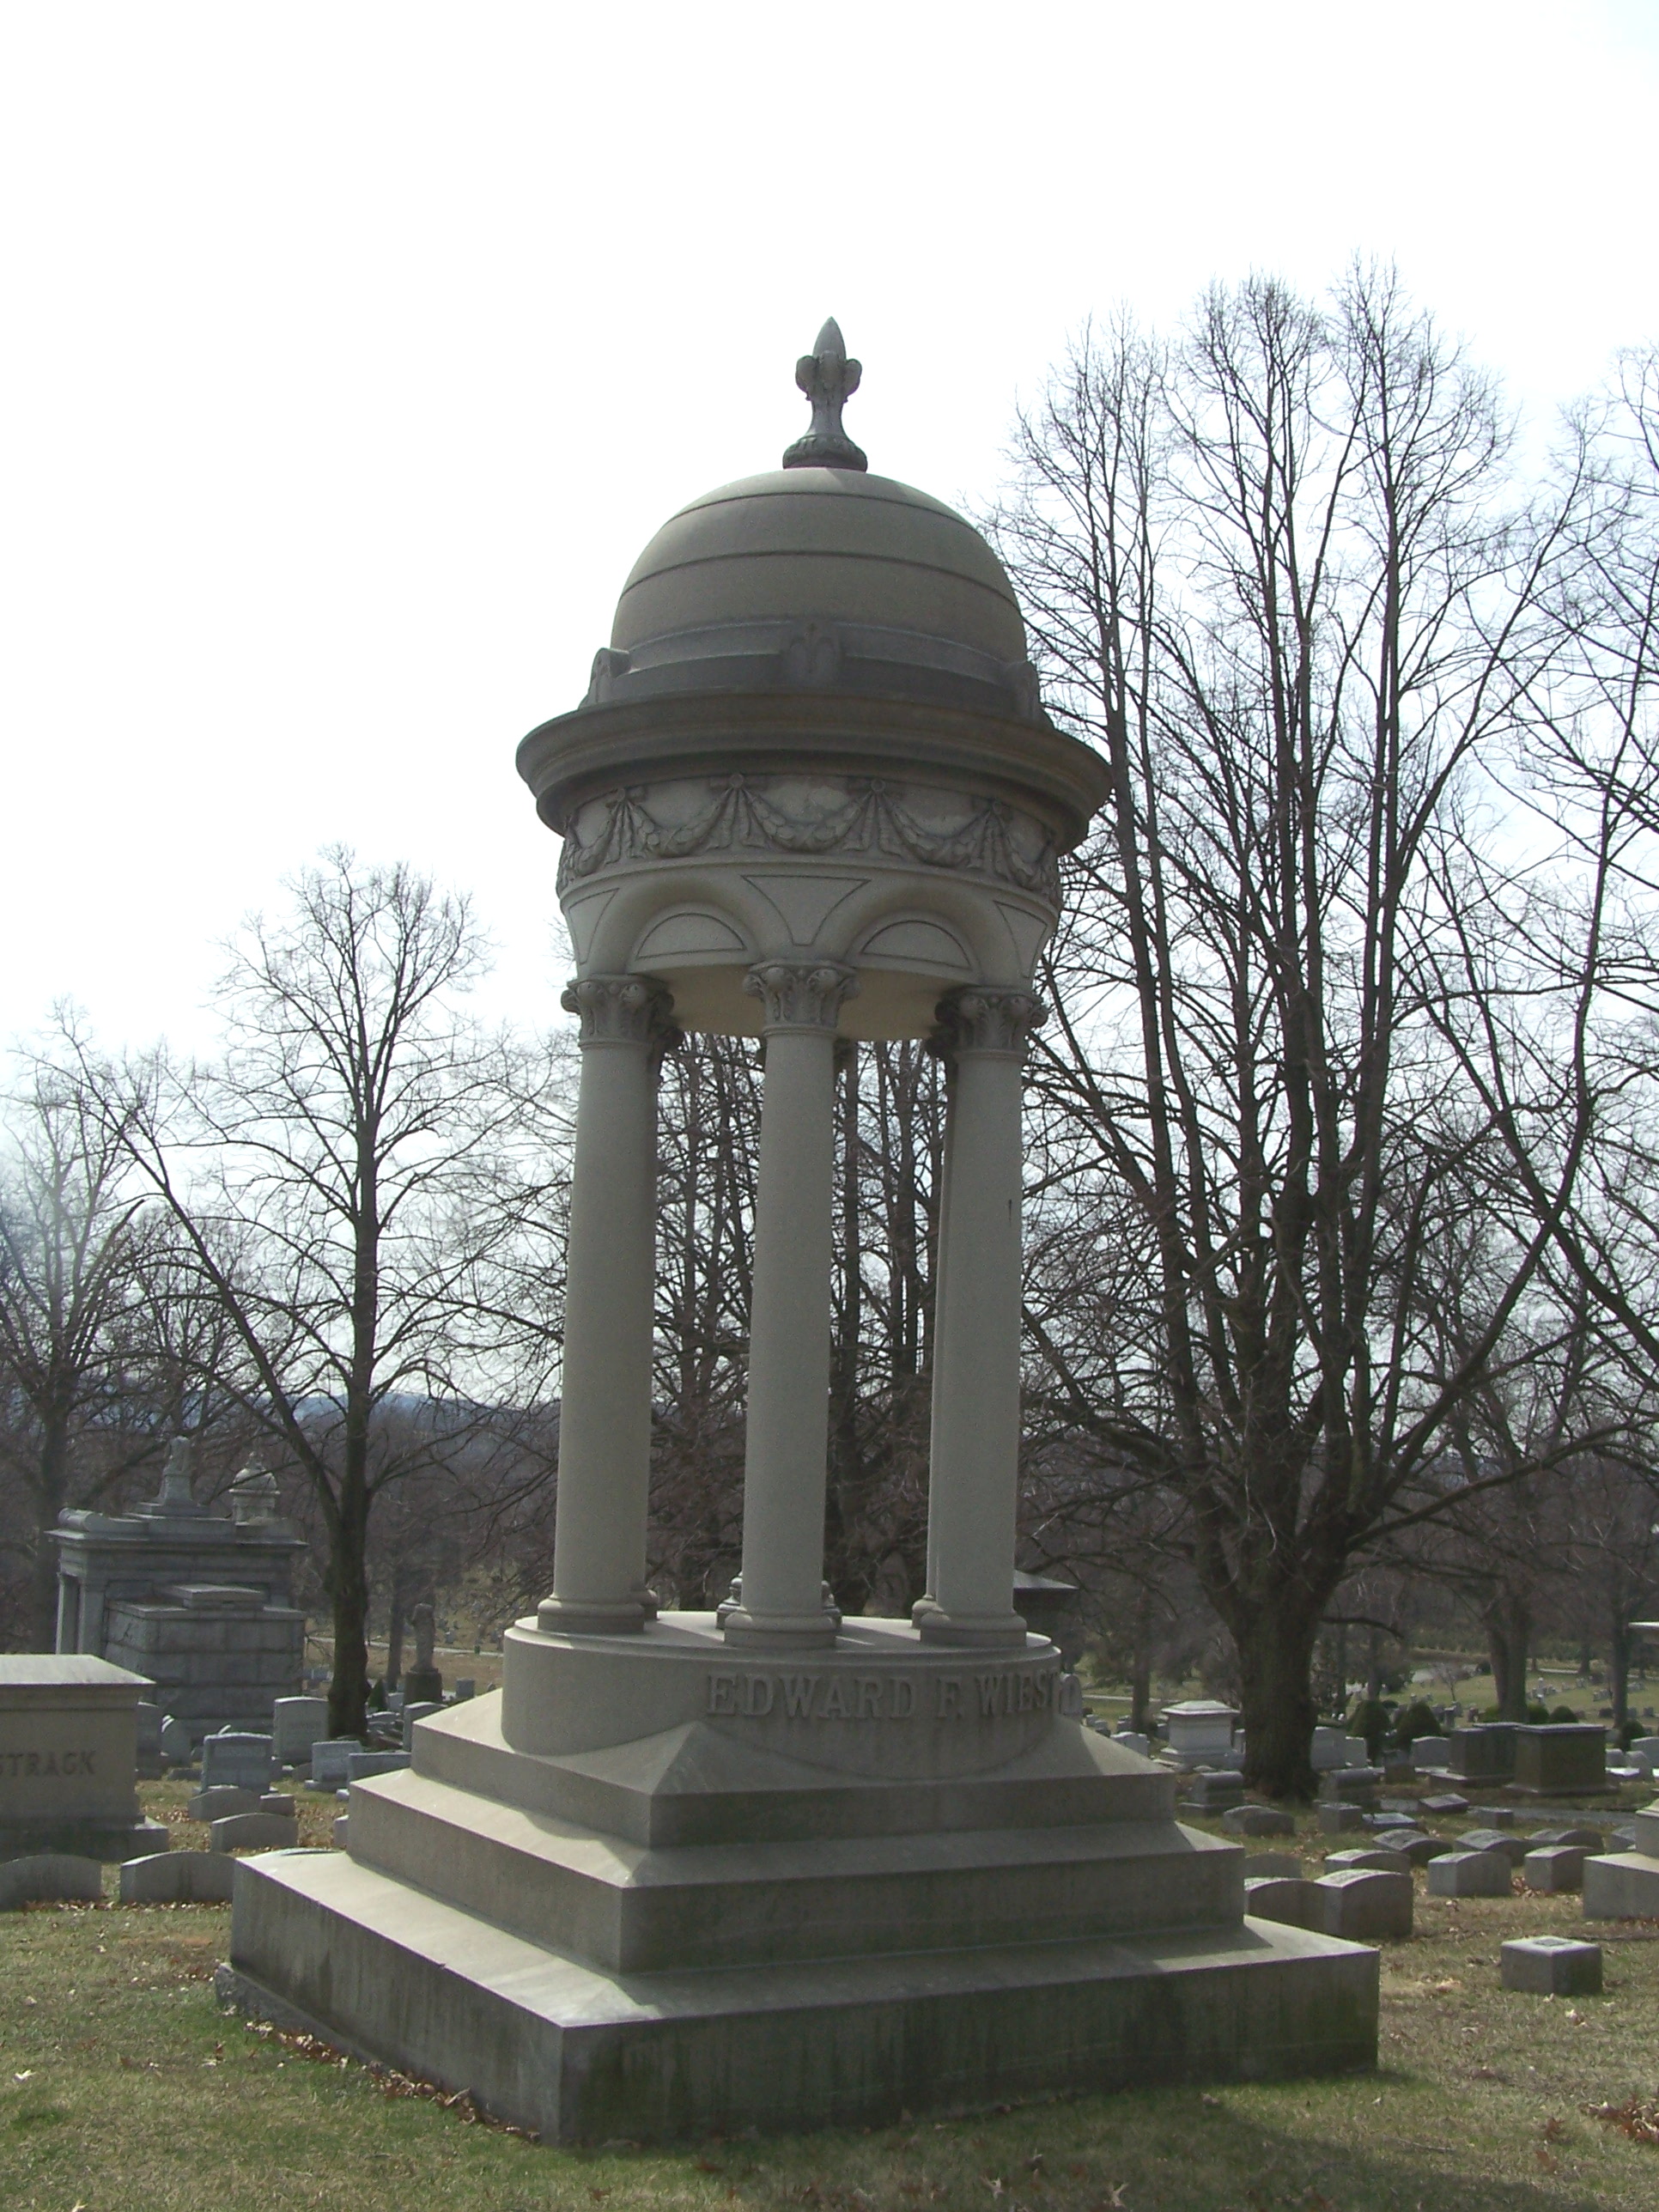 Cemeteries, Tombstones, Mausoleums - Prospect Hill Cemetery in York ...